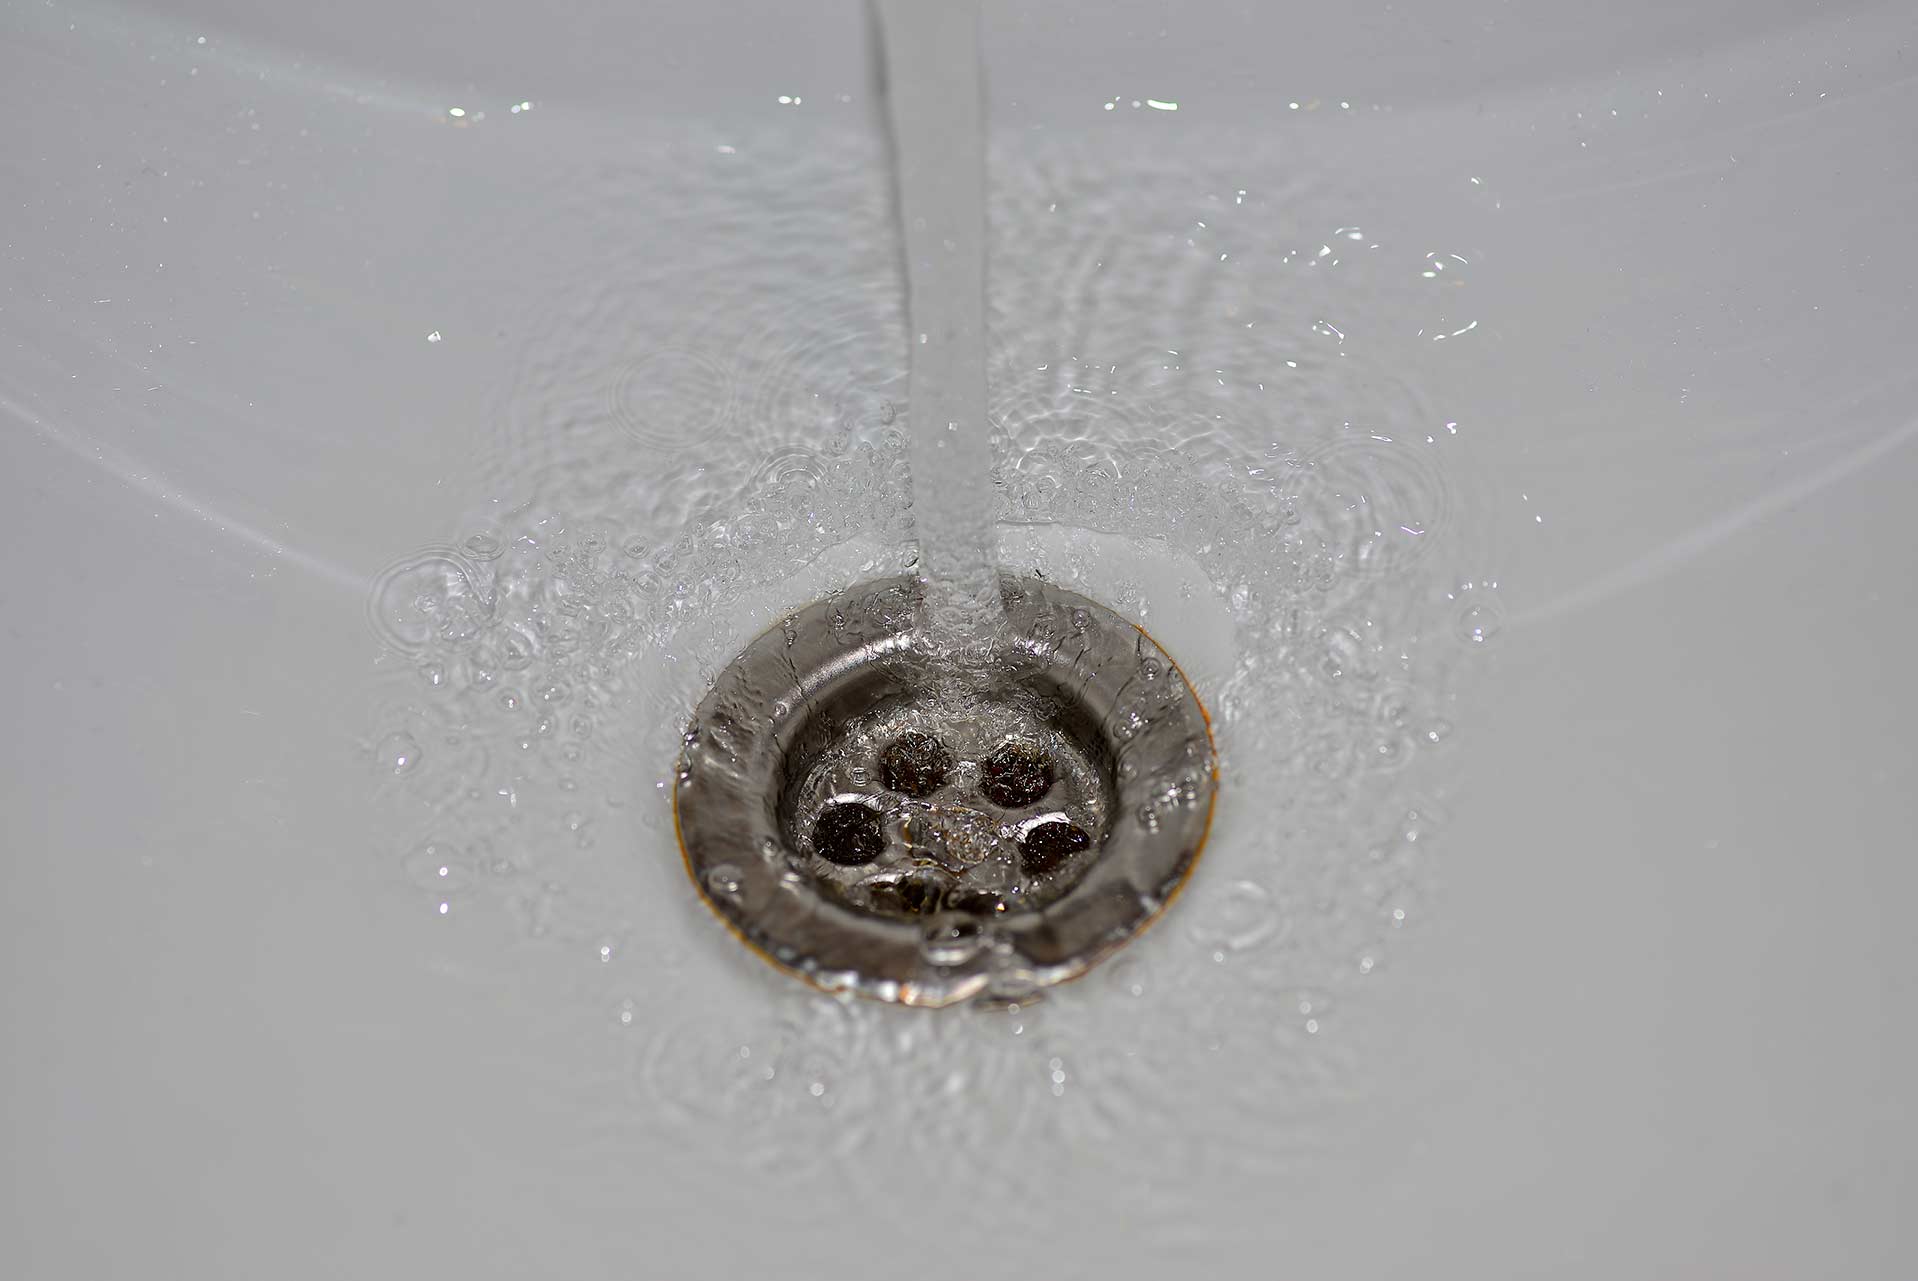 A2B Drains provides services to unblock blocked sinks and drains for properties in Clitheroe.